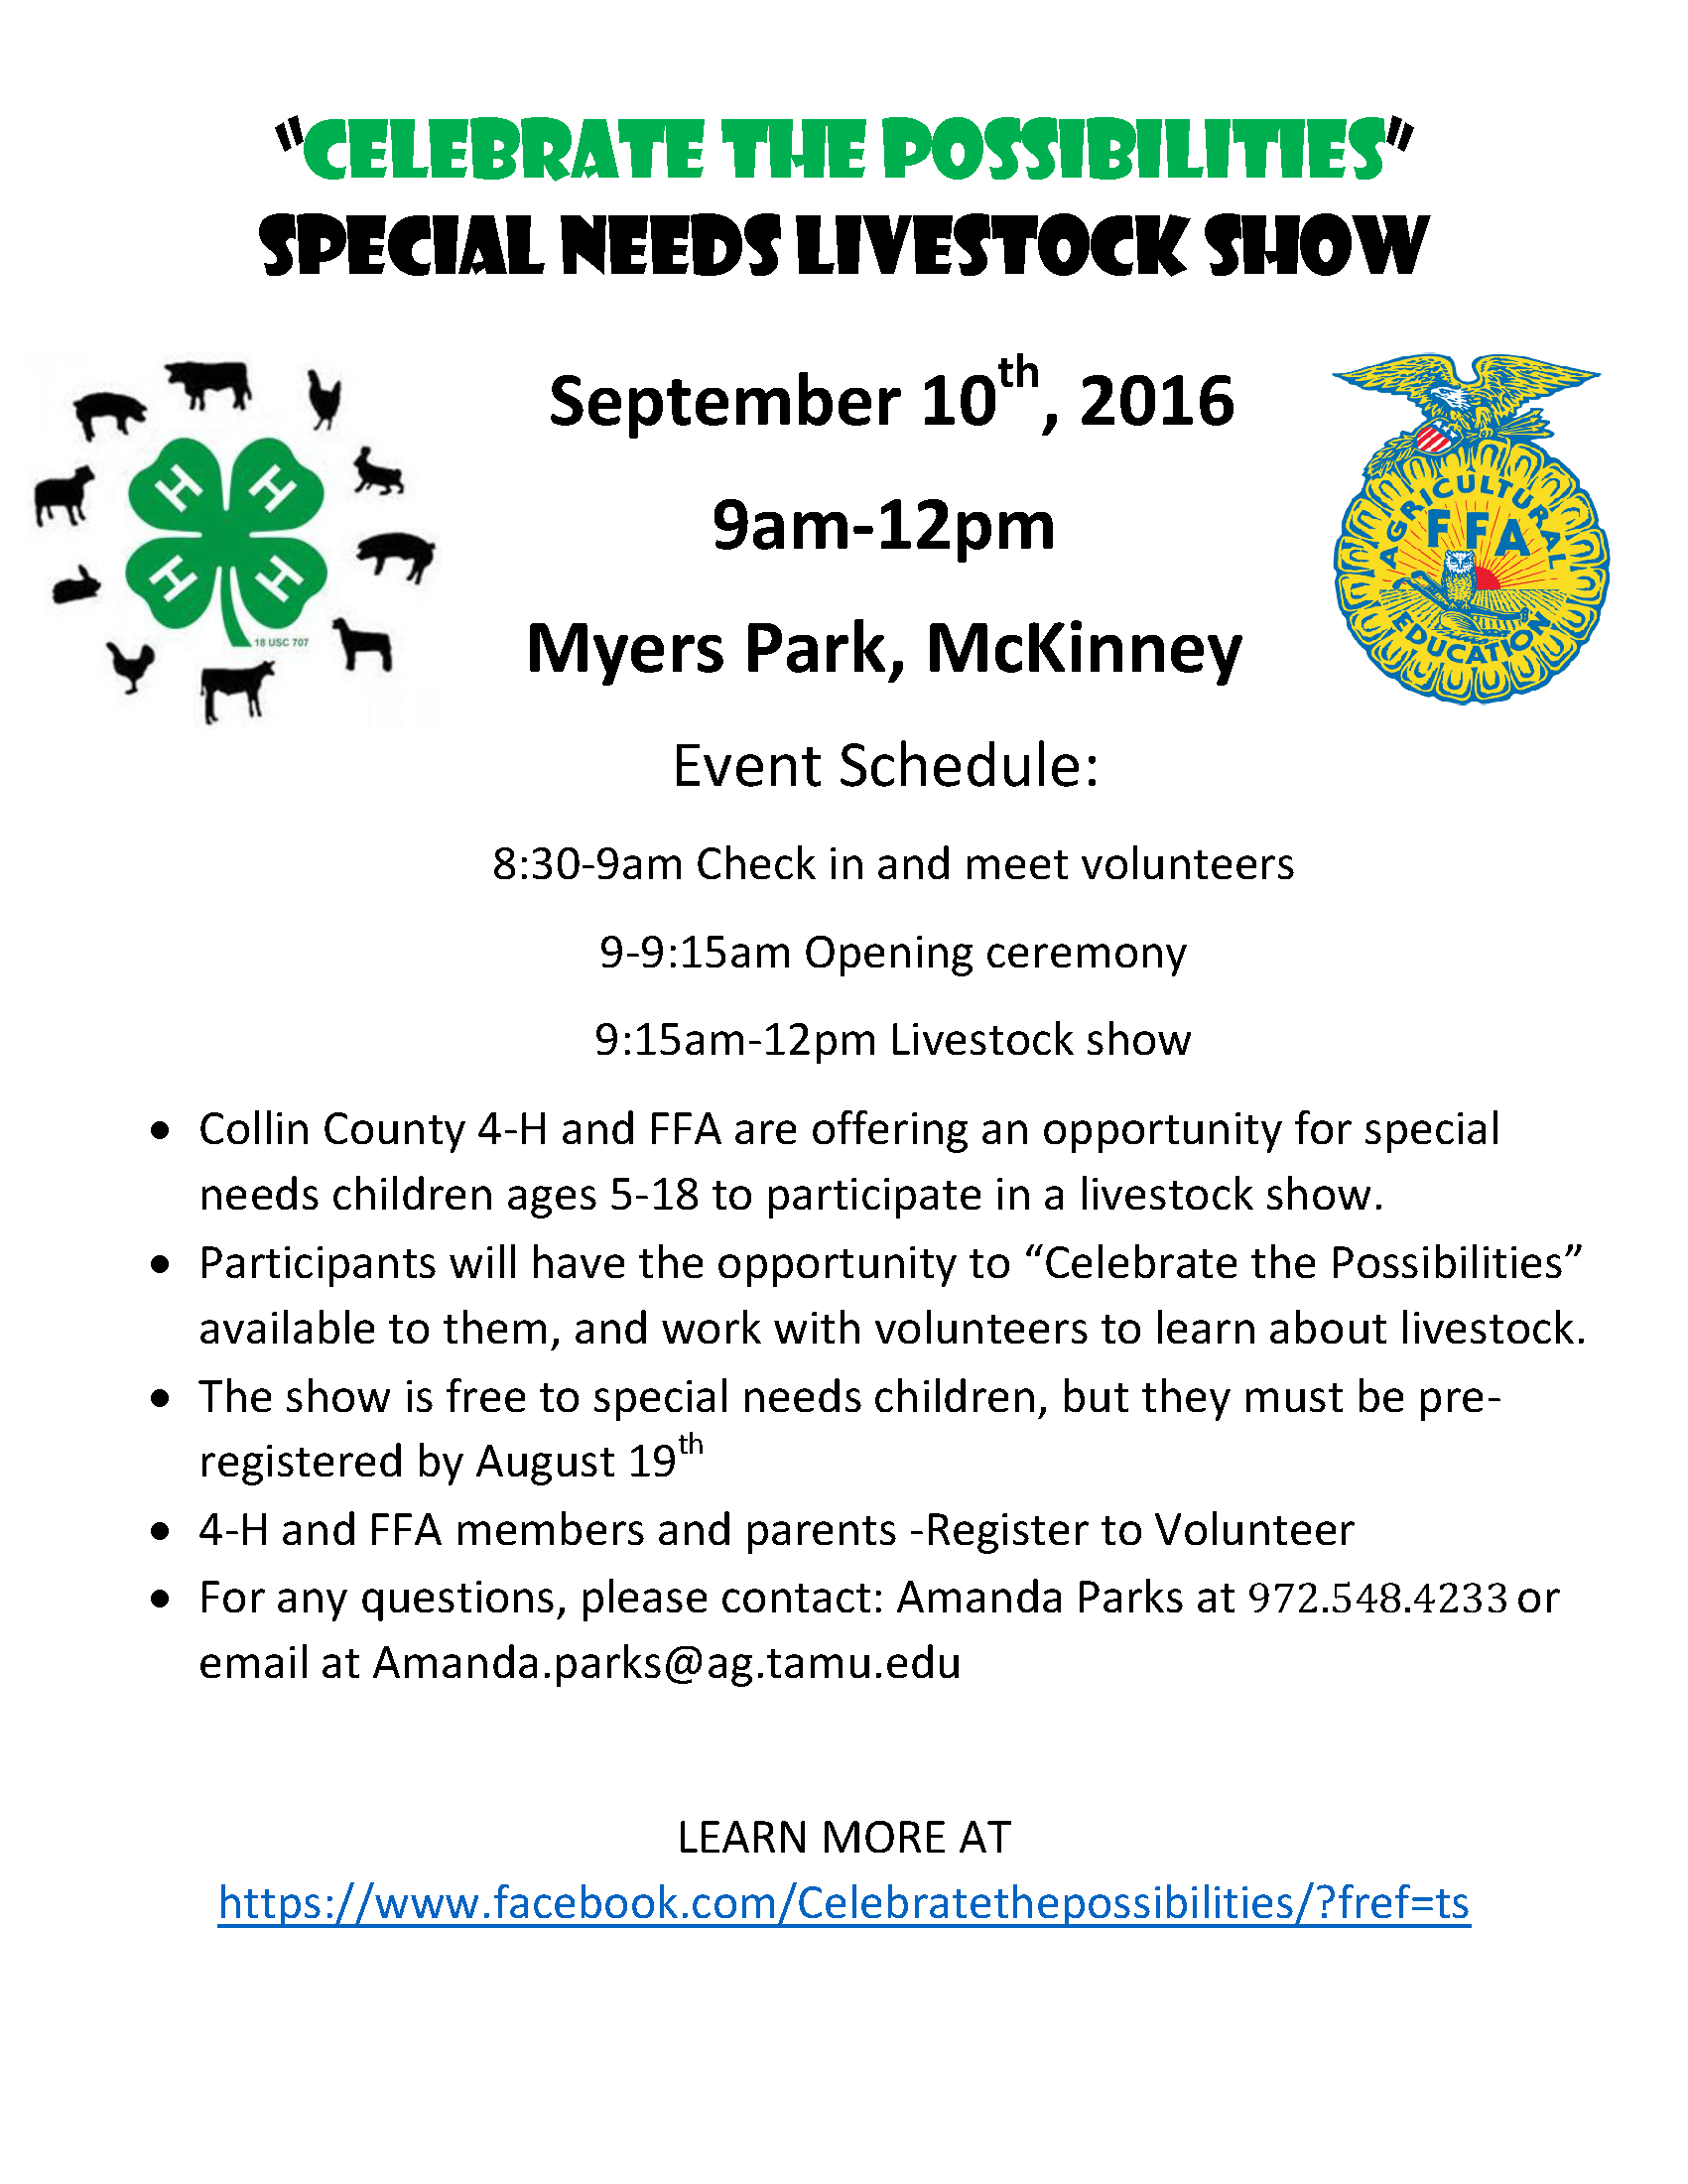 Celebrate the Possibilities” Special Needs Livestock Show